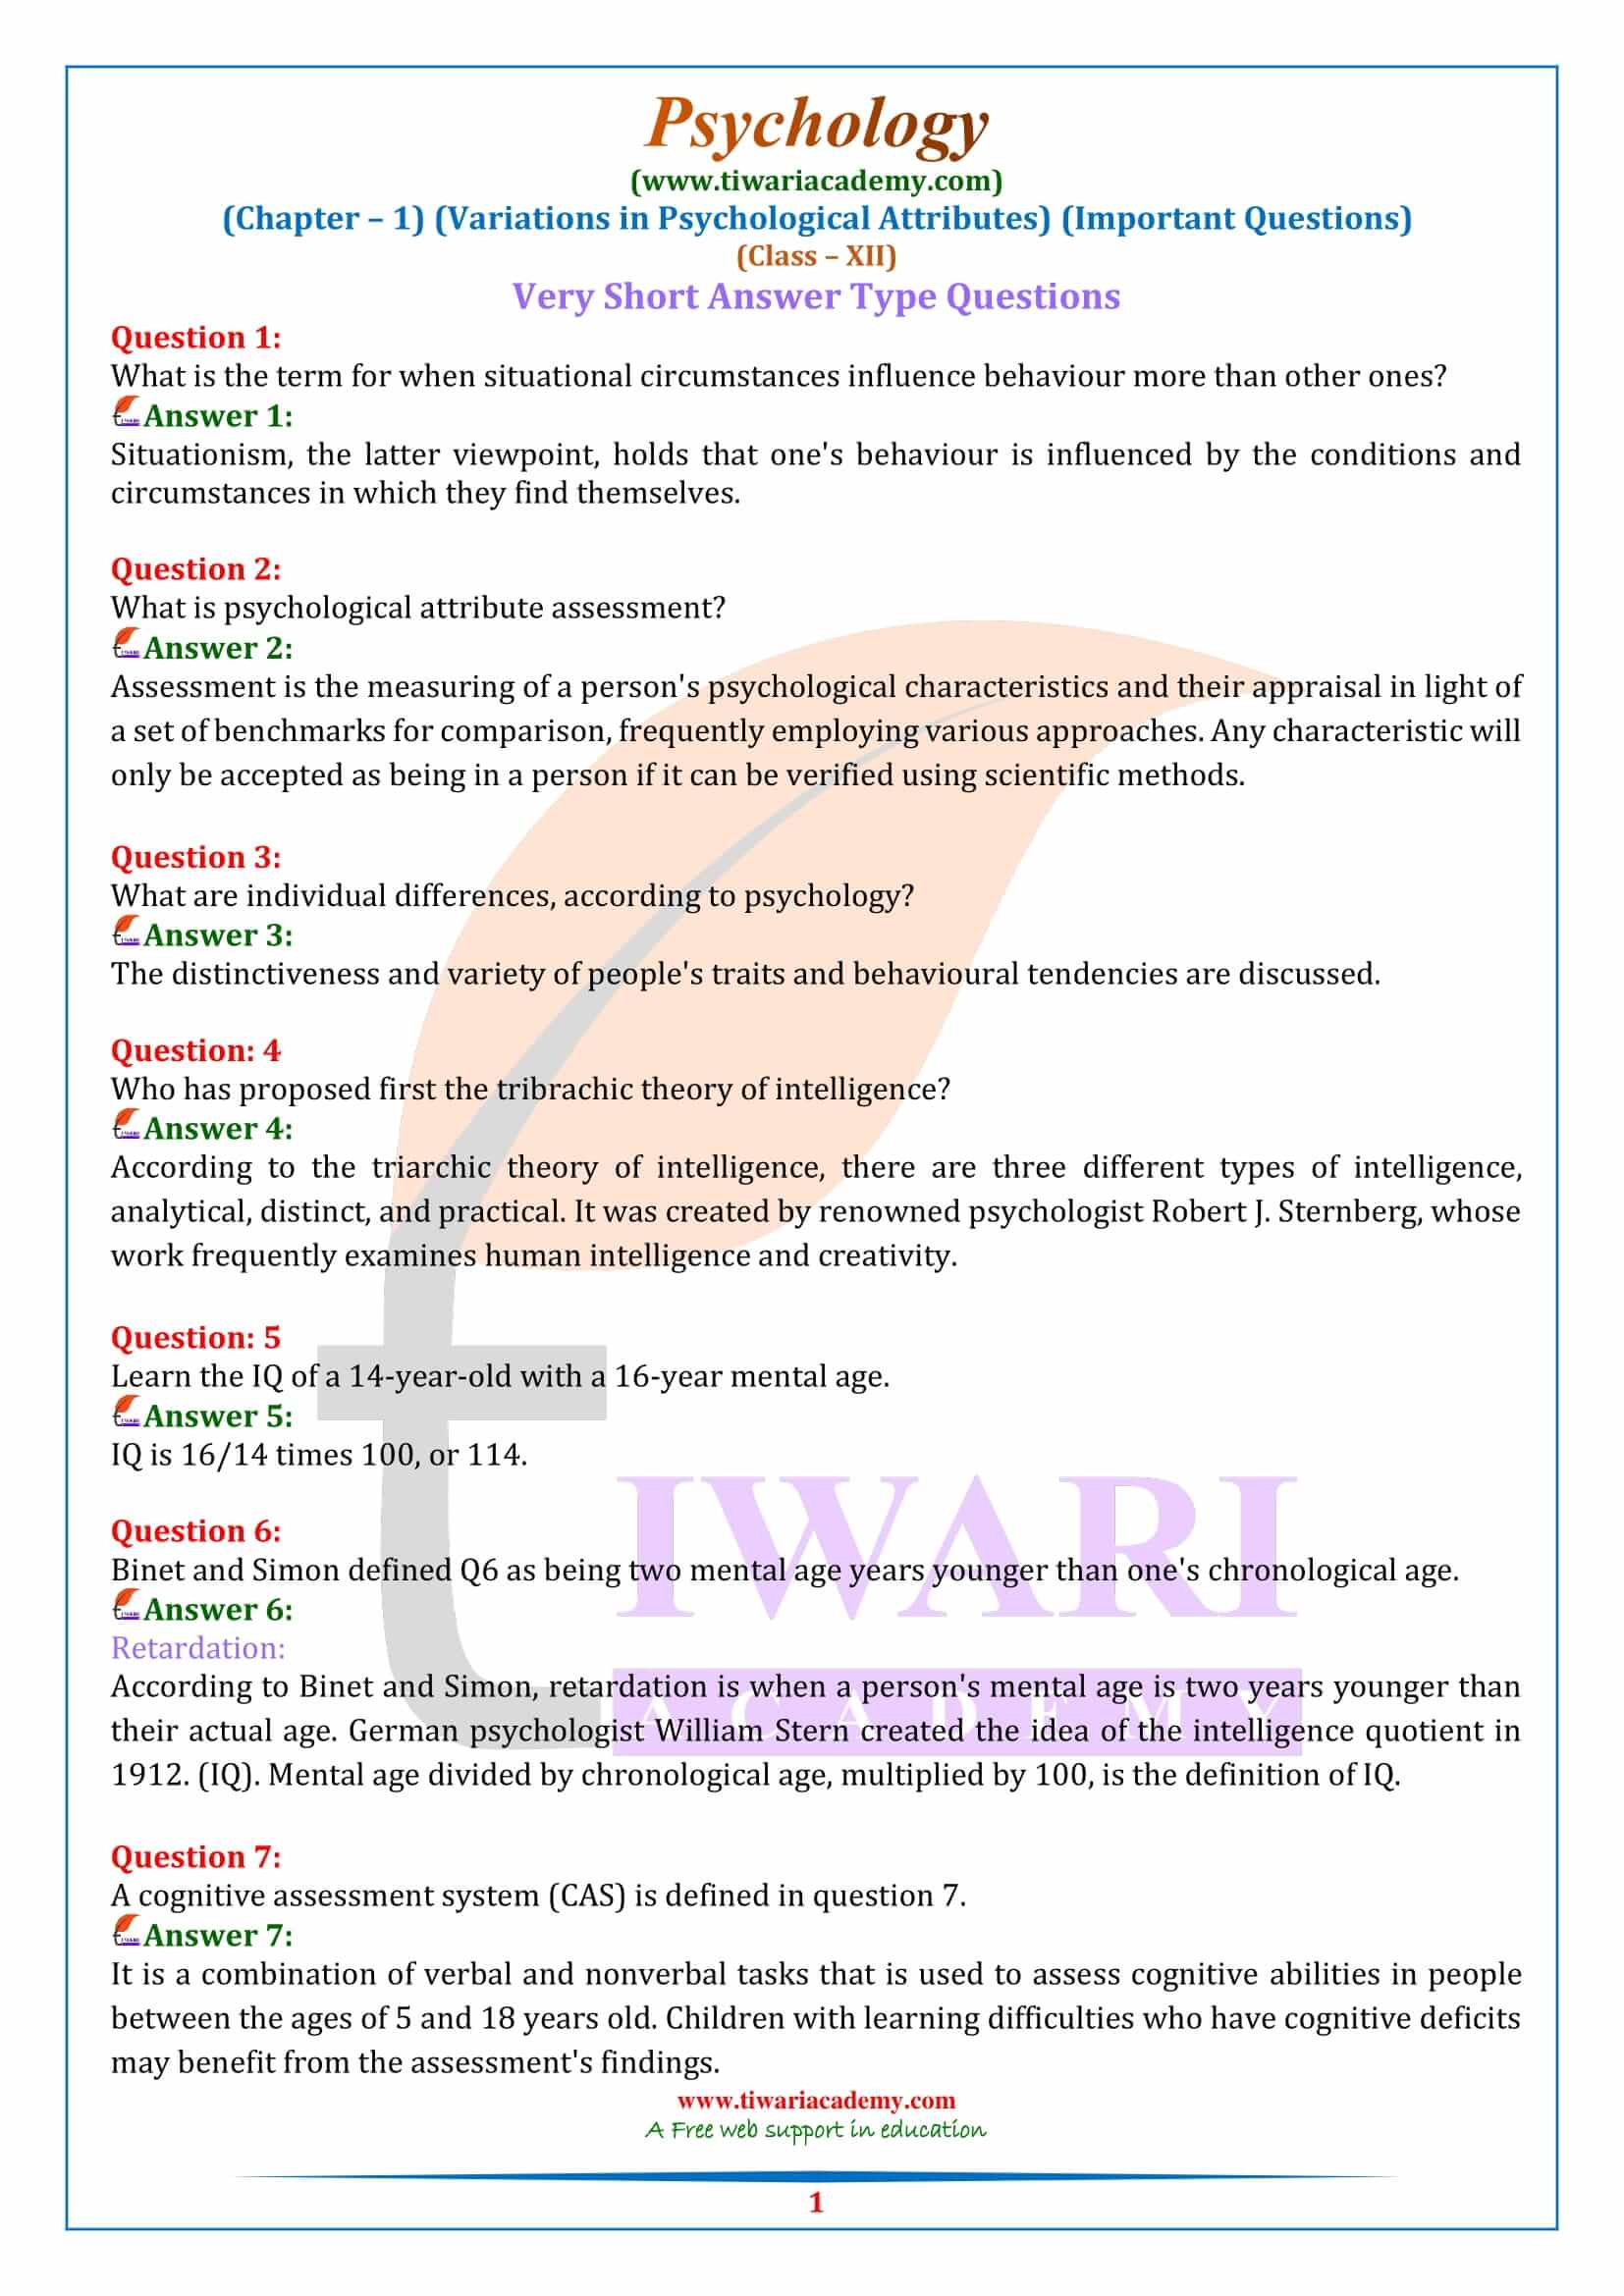 Class 12 Psychology Chapter 1 Important Questions Very short questions